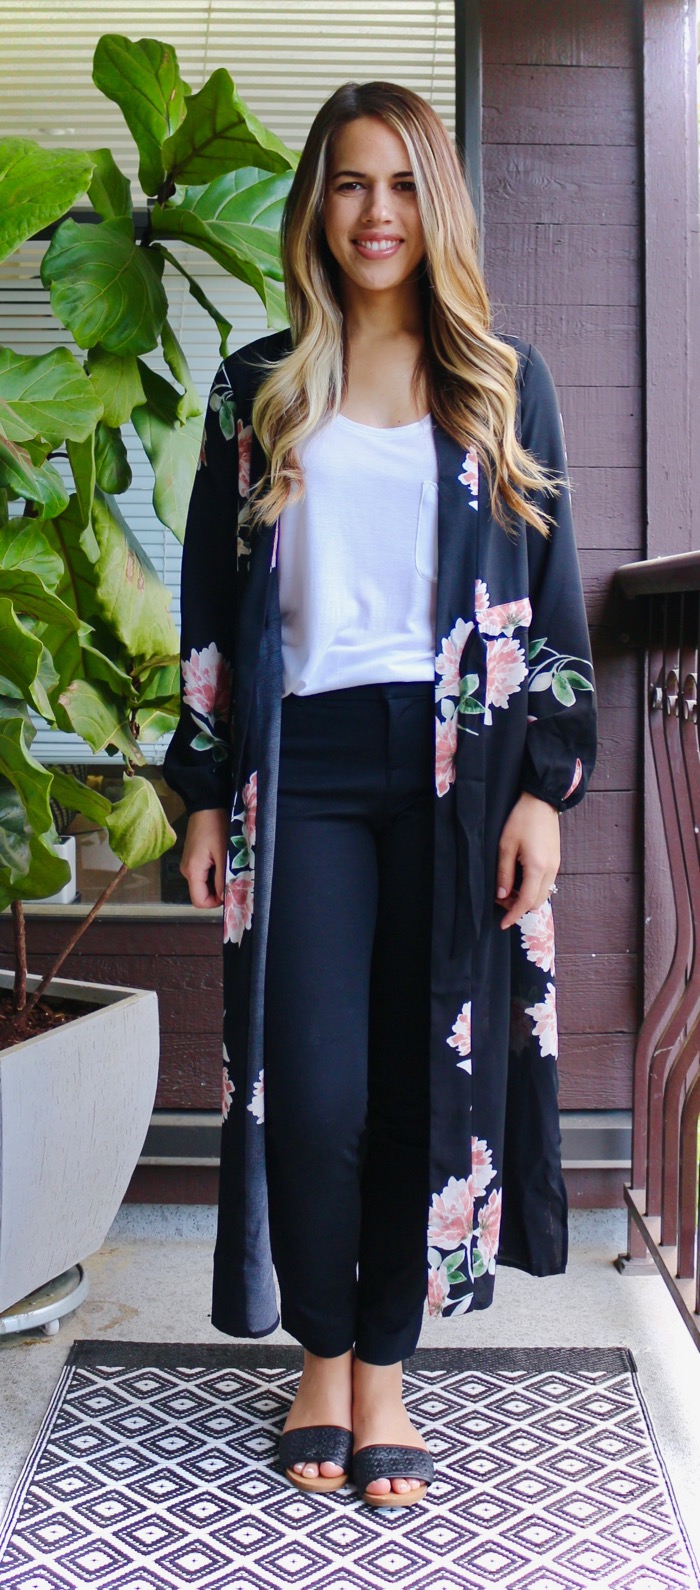 Jules in Flats - How to wear a Kimono at Work - 